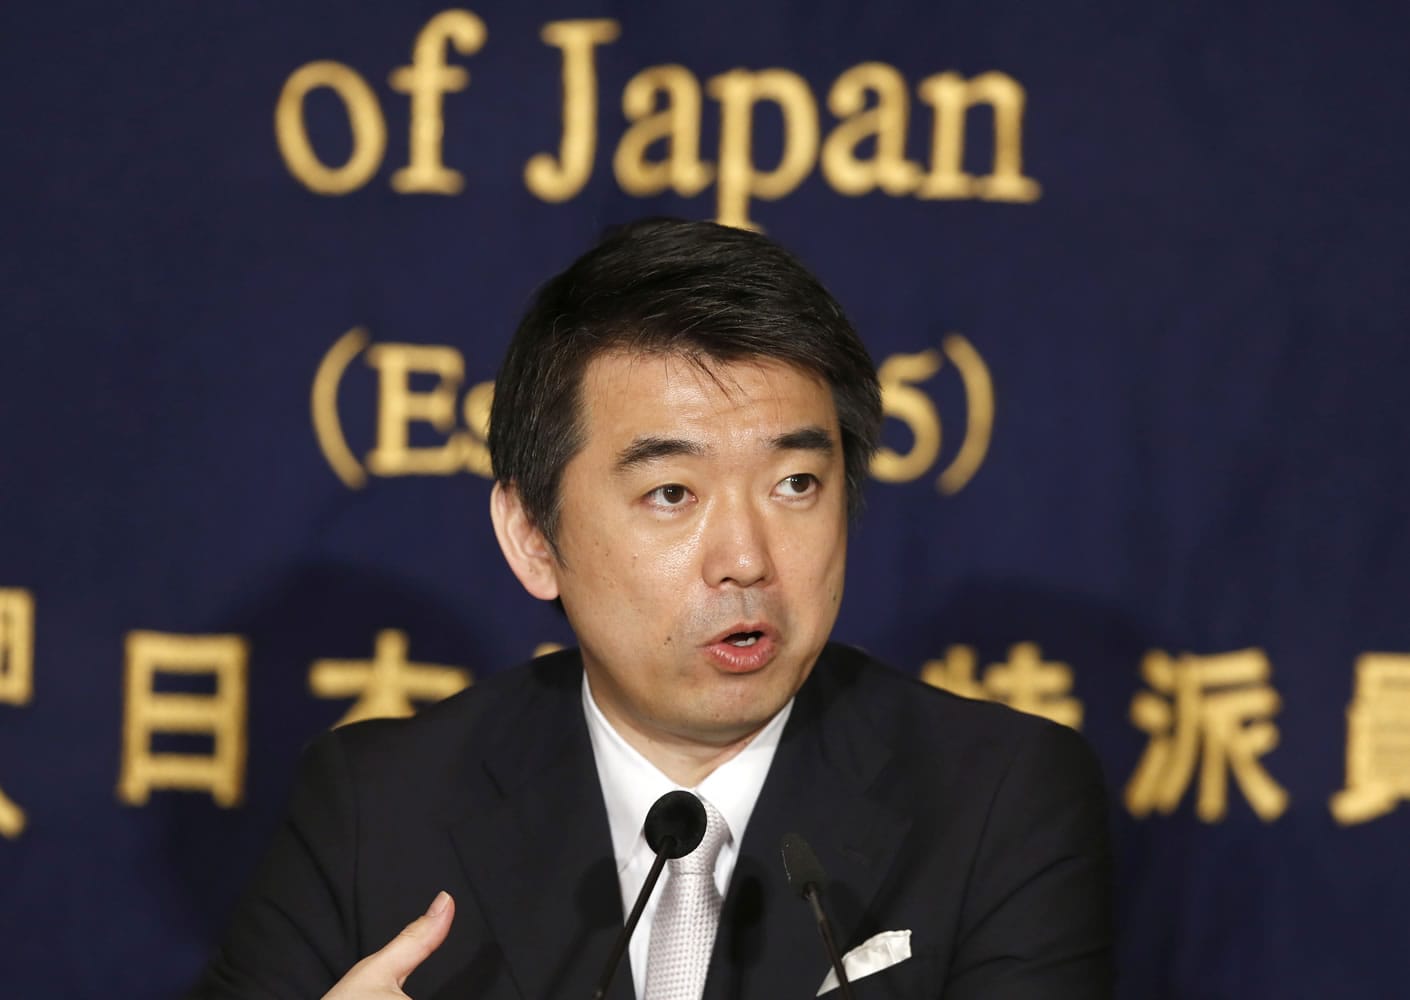 Osaka Mayor Toru Hashimoto speaks during a press conference at the Foreign Correspondents' Club of Japan in Tokyo on Monday. The outspoken Japanese politician apologized for saying U.S.